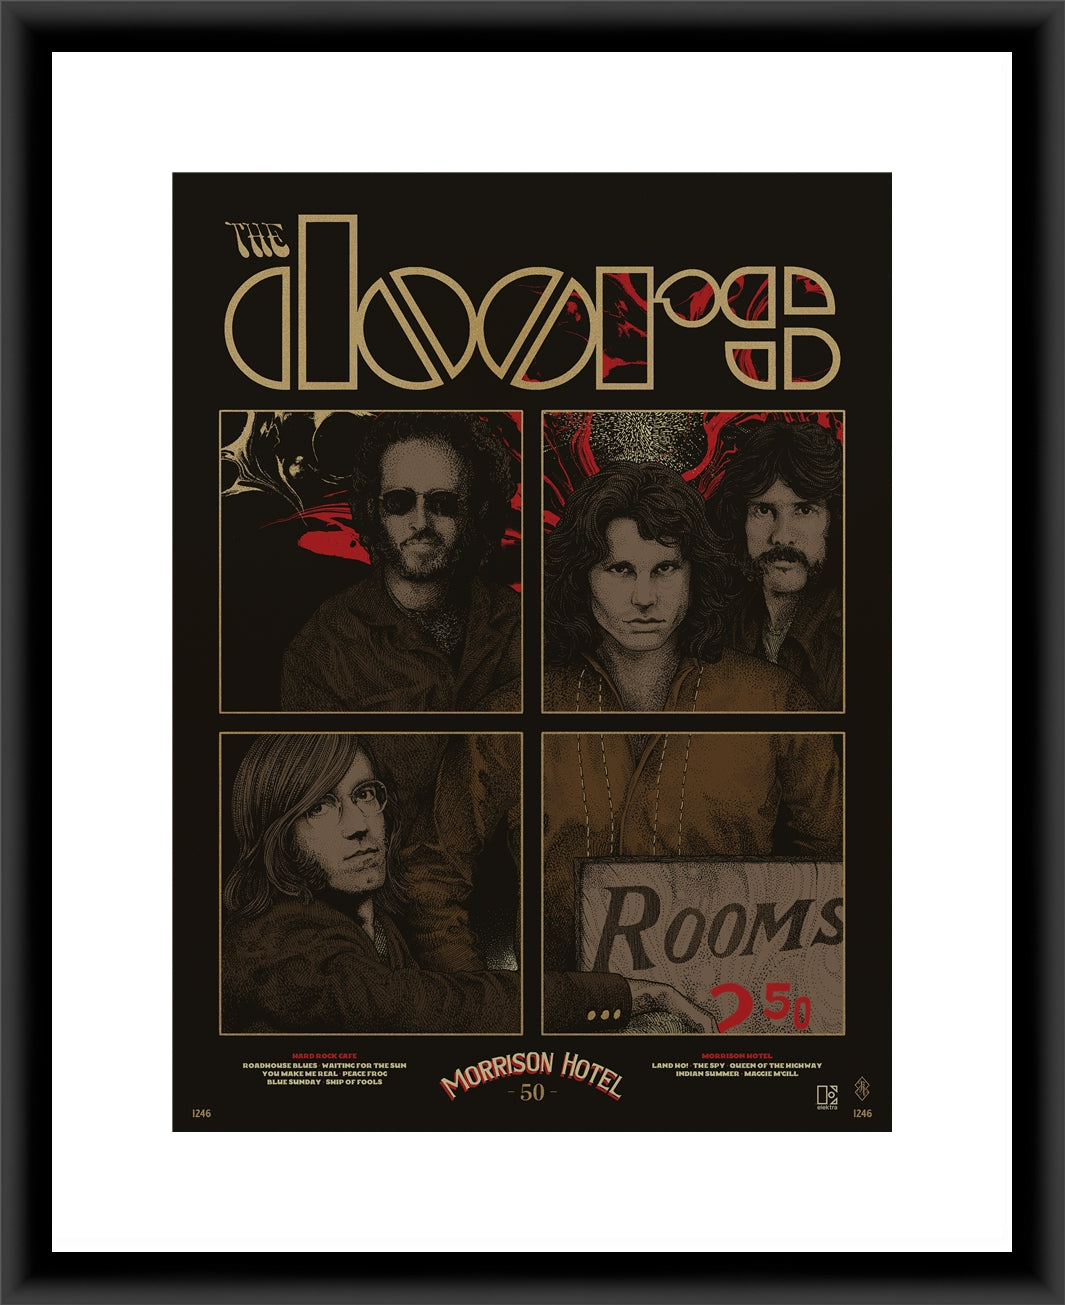 The Doors Morrison Hotel Print by Richey Beckett (Indian Summer Edition)